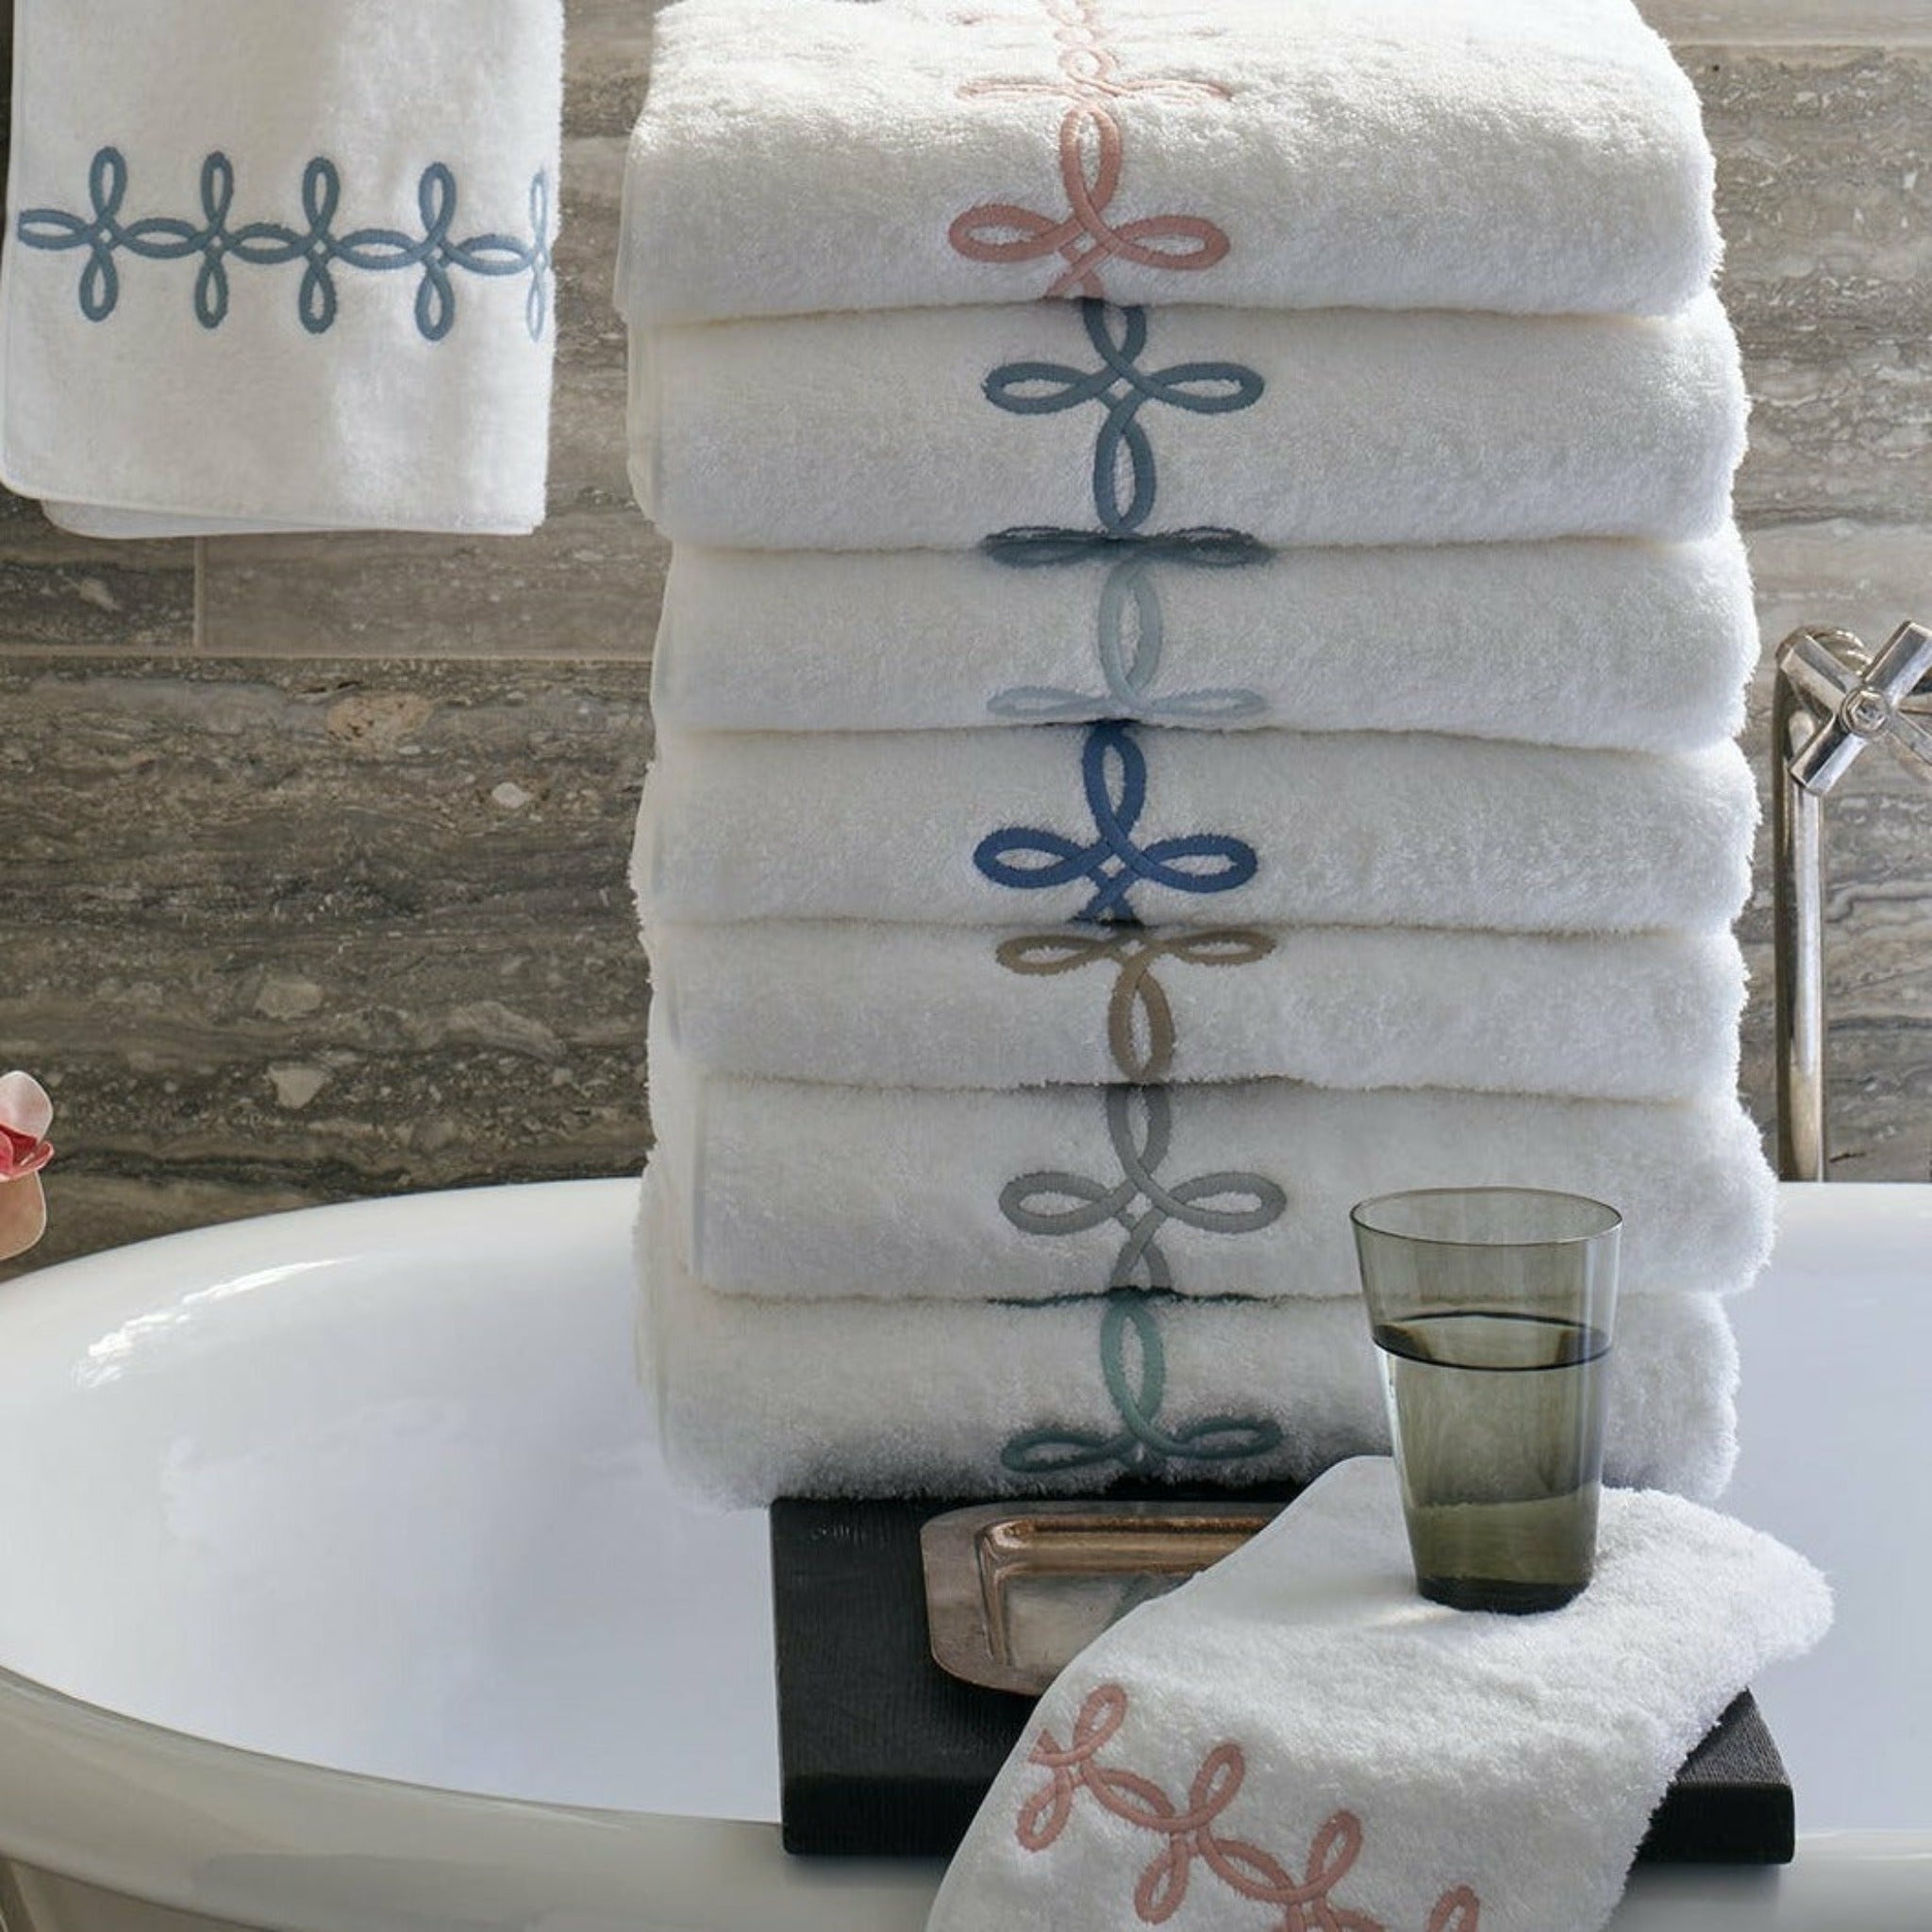 Why A White Towel Should Be A Bathroom Staple